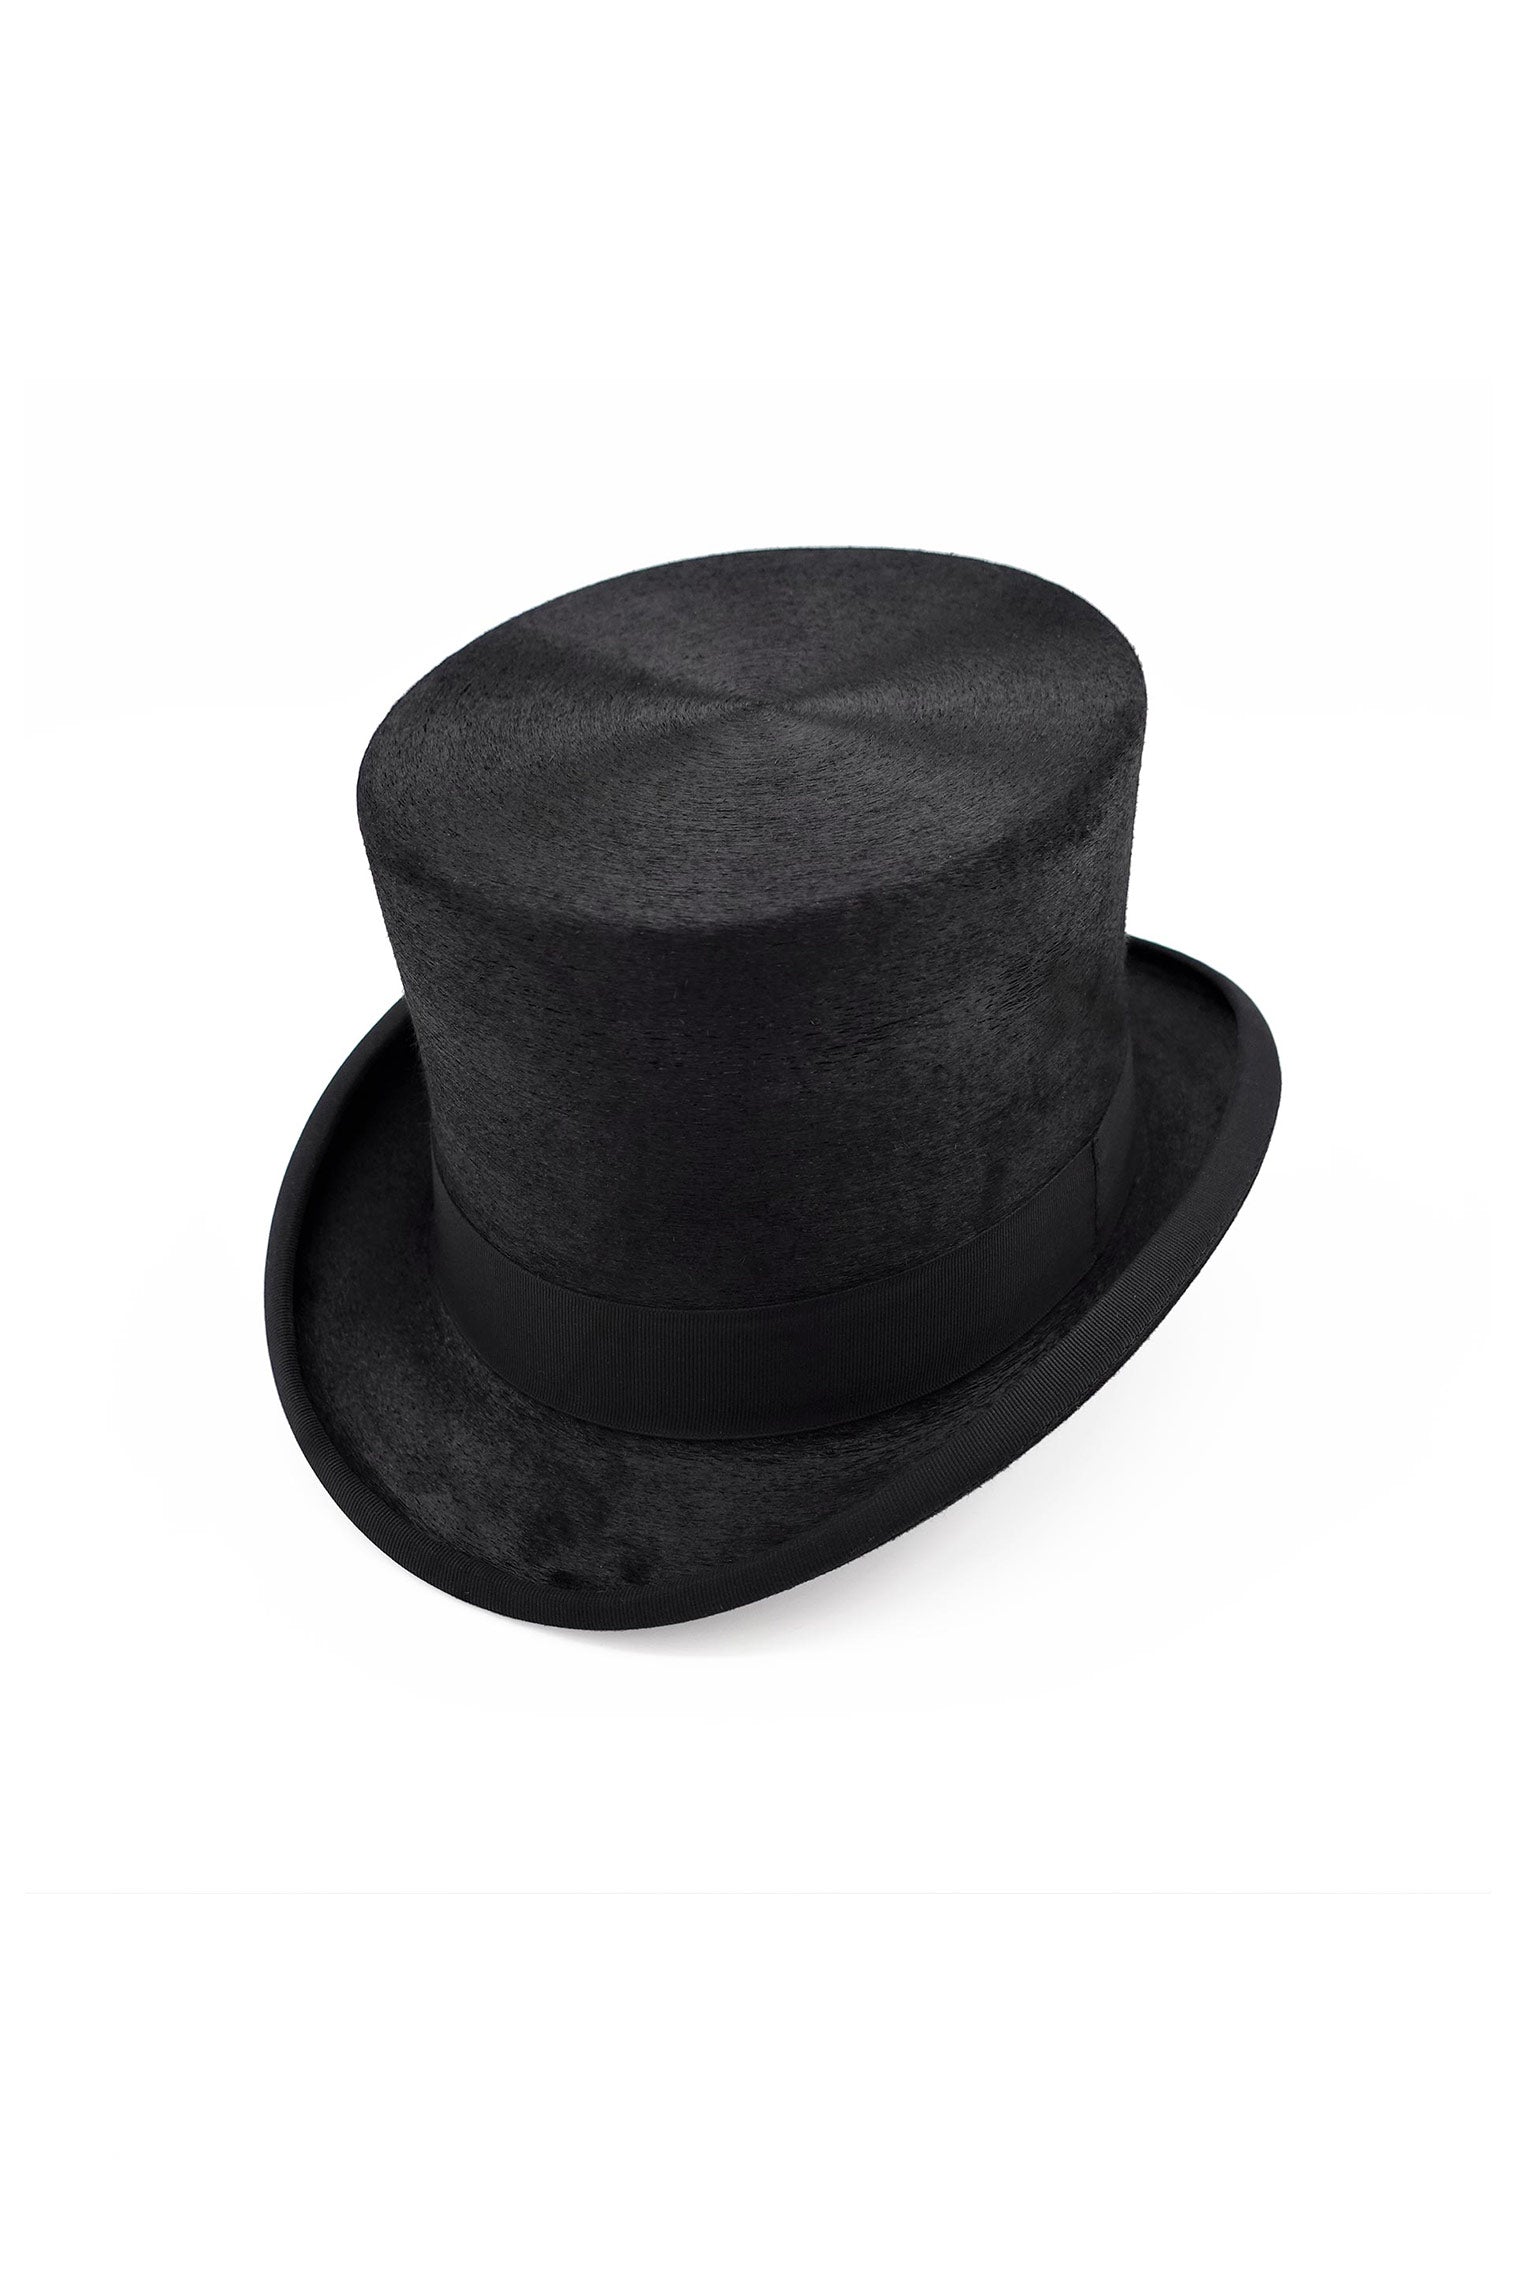 Mayfair Top Hat - Products - Lock & Co. Hatters London UK